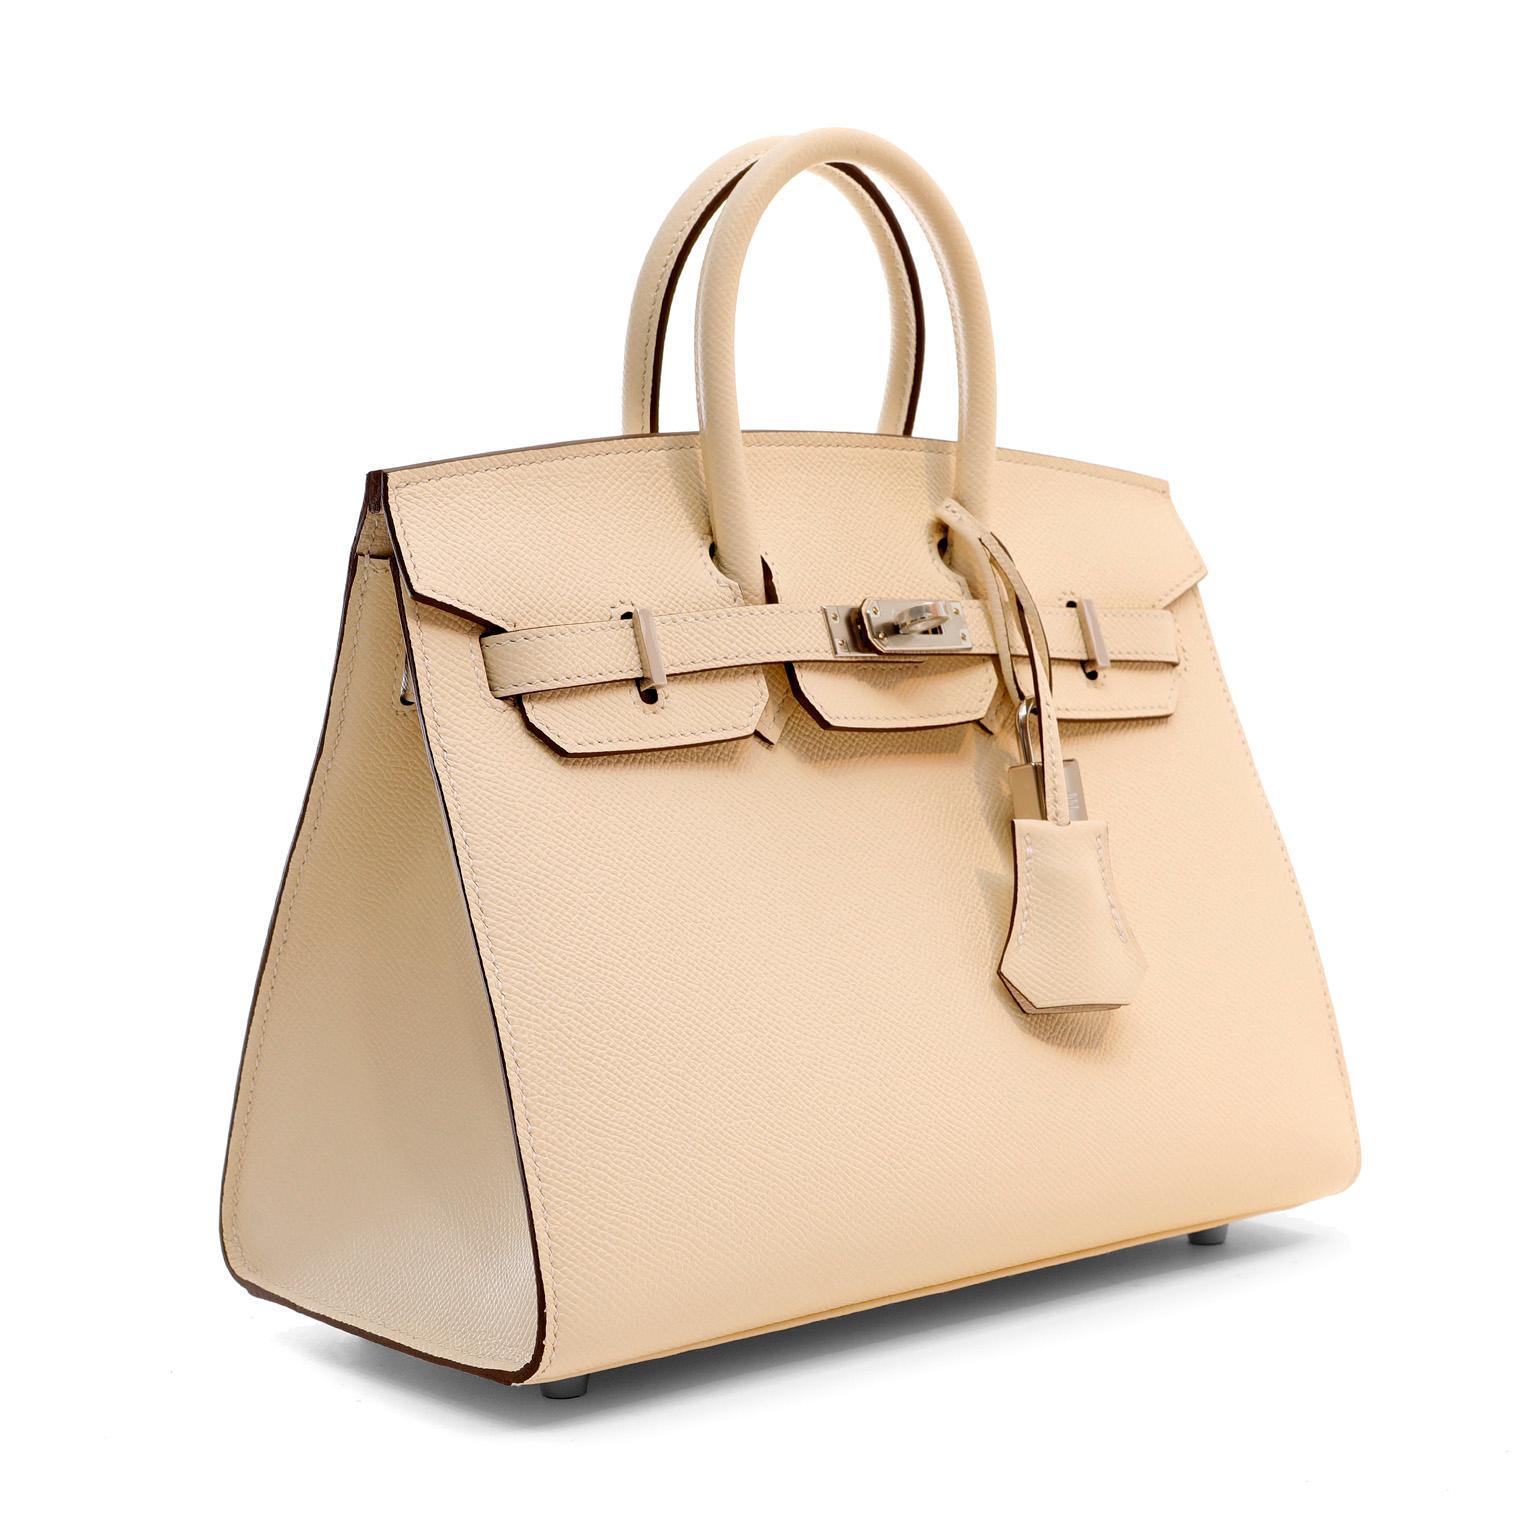 This authentic Hermès Cream Epsom 25 cm Sellier Birkin is in pristine unworn condition; the protective plastic is still intact on the hardware.    Considered the ultimate luxury item, the Hermès Birkin is stitched by hand. Waitlists are commonplace